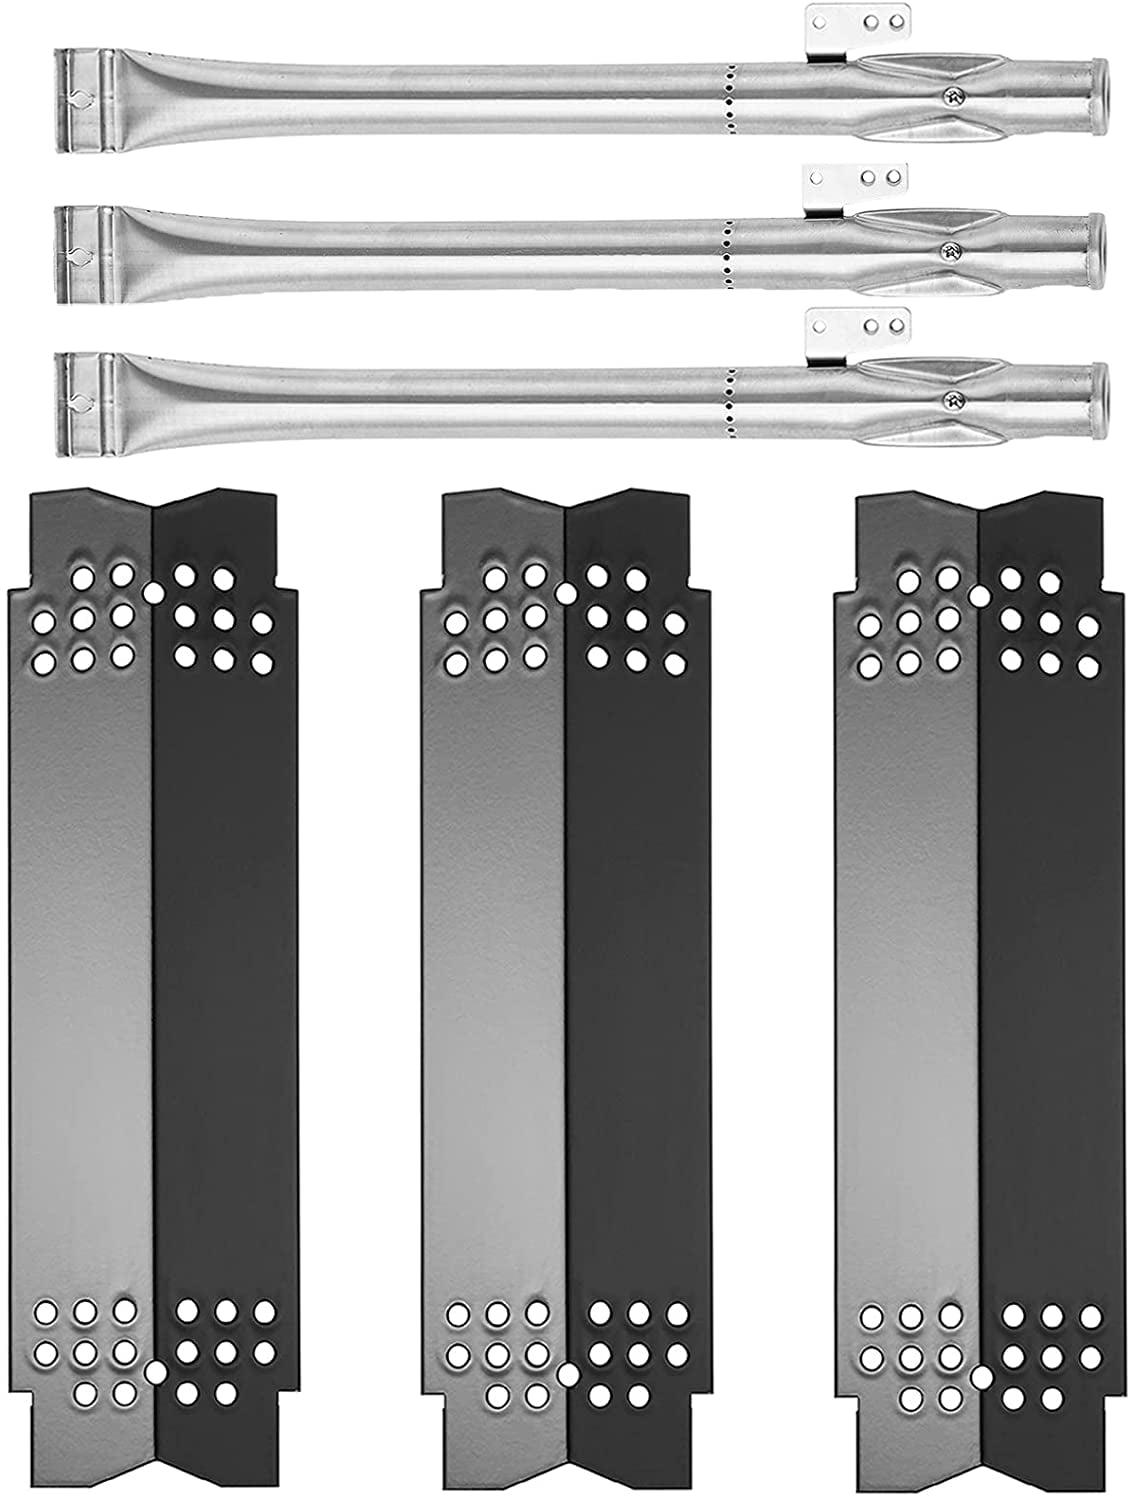 Stainless Heat Plates Replacement Kit Stainless Burners Nexgrill 720-0825 